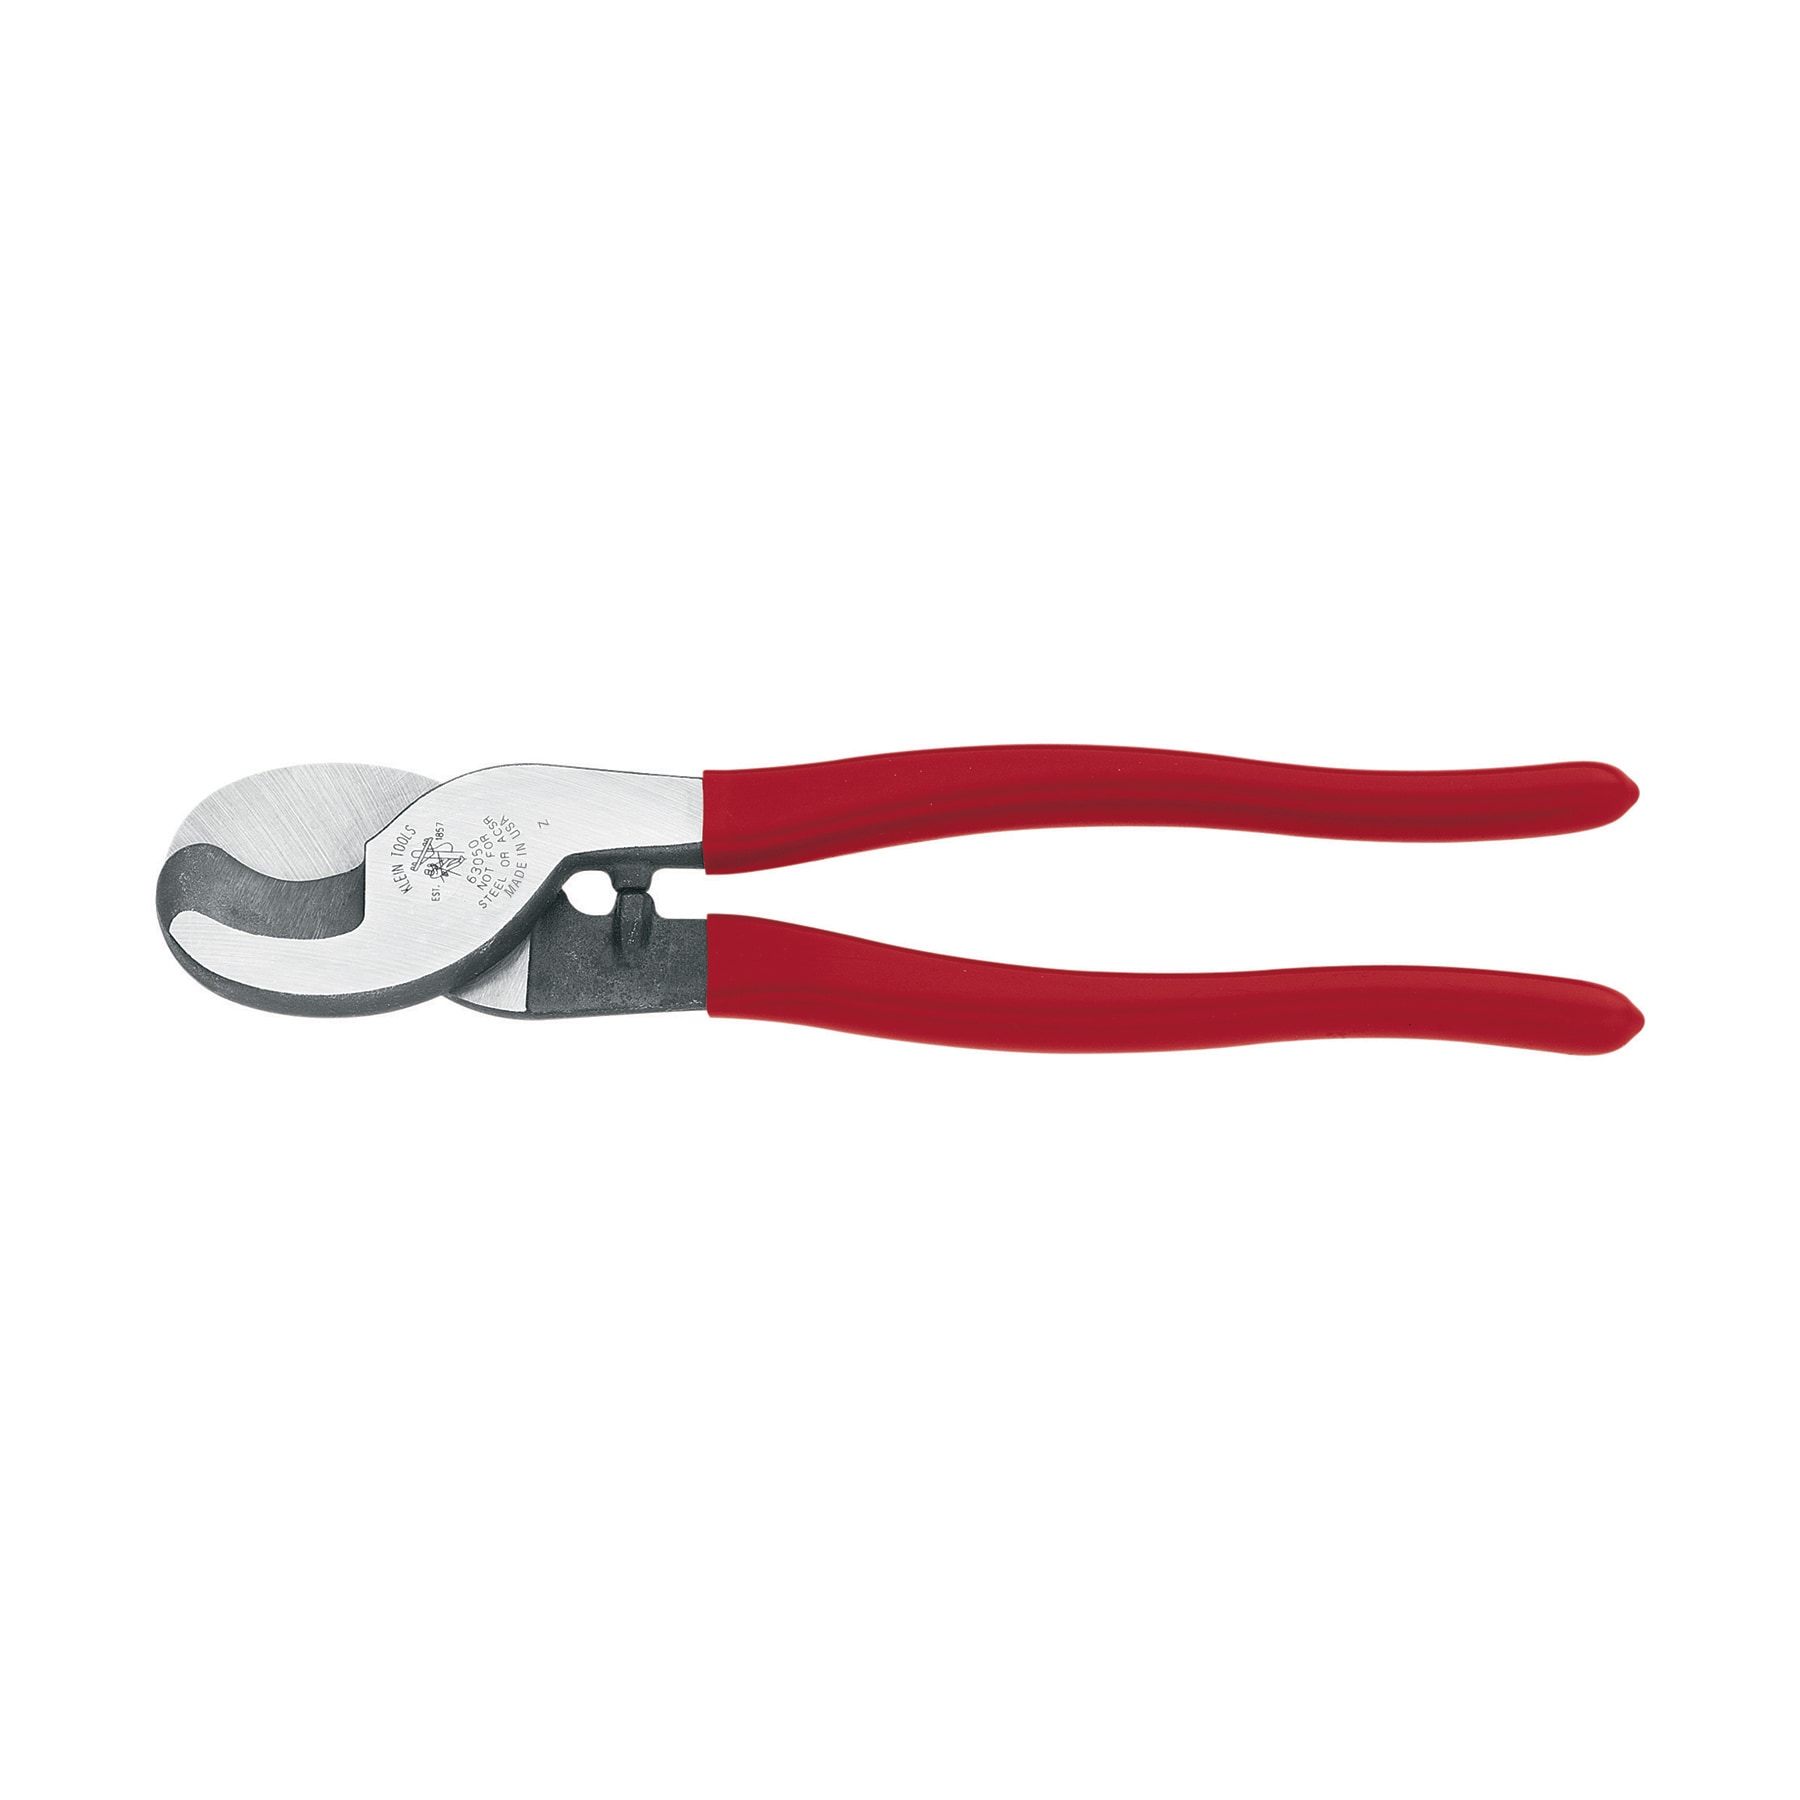 Cable Cutters at